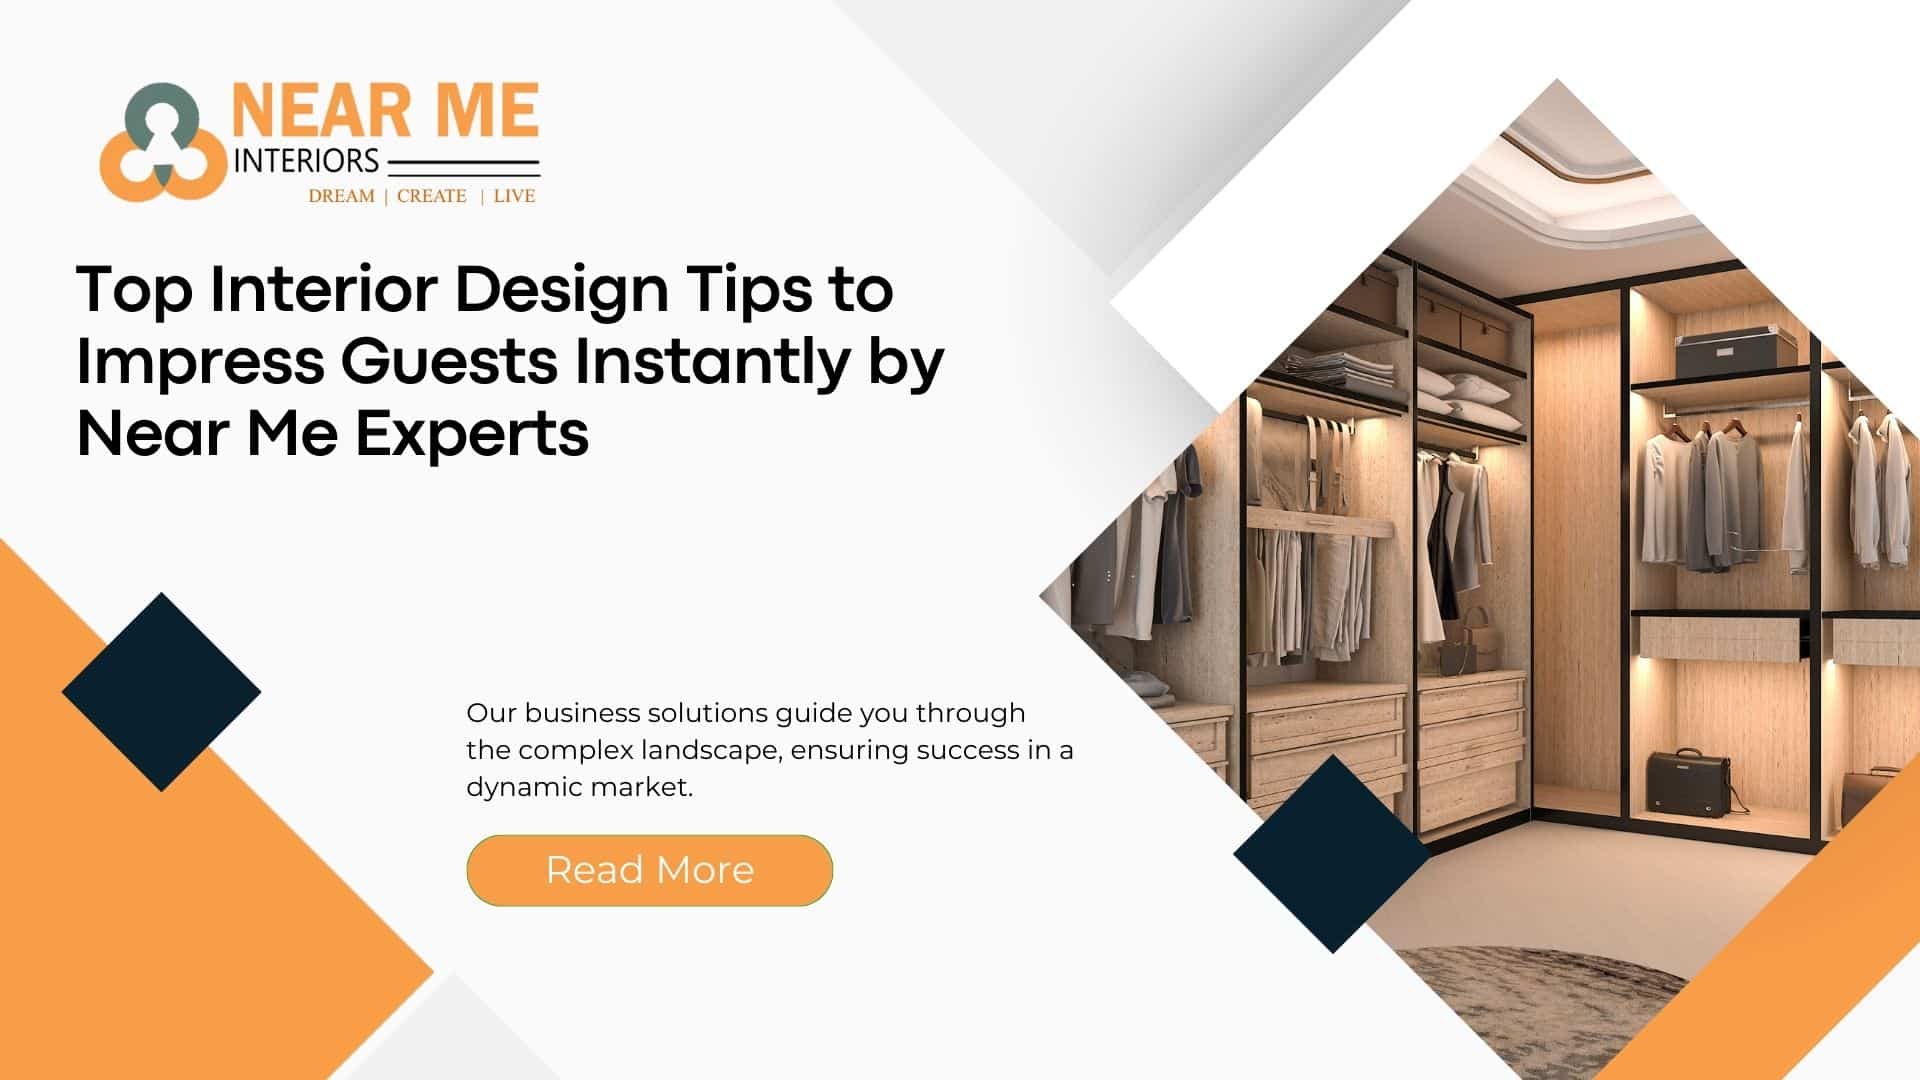 Top Interior Design Tips to Impress Guests Instantly by Near Me Experts